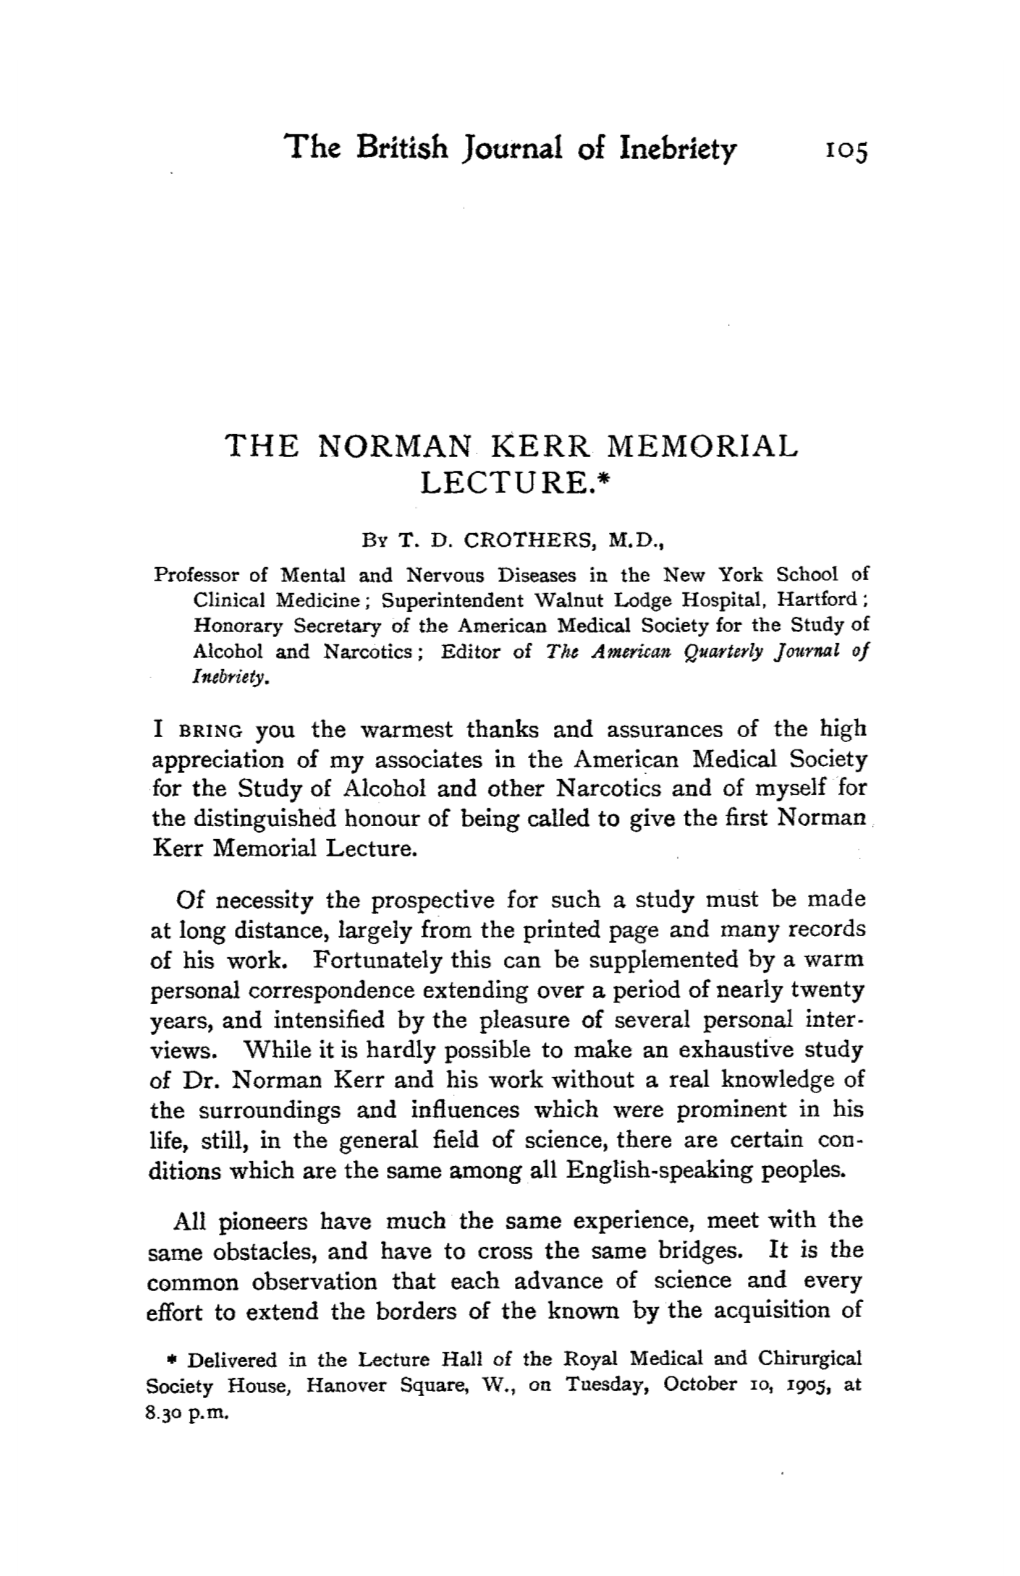 The British Journal of Inebriety the NORMAN KERR MEMORIAL LECTURE